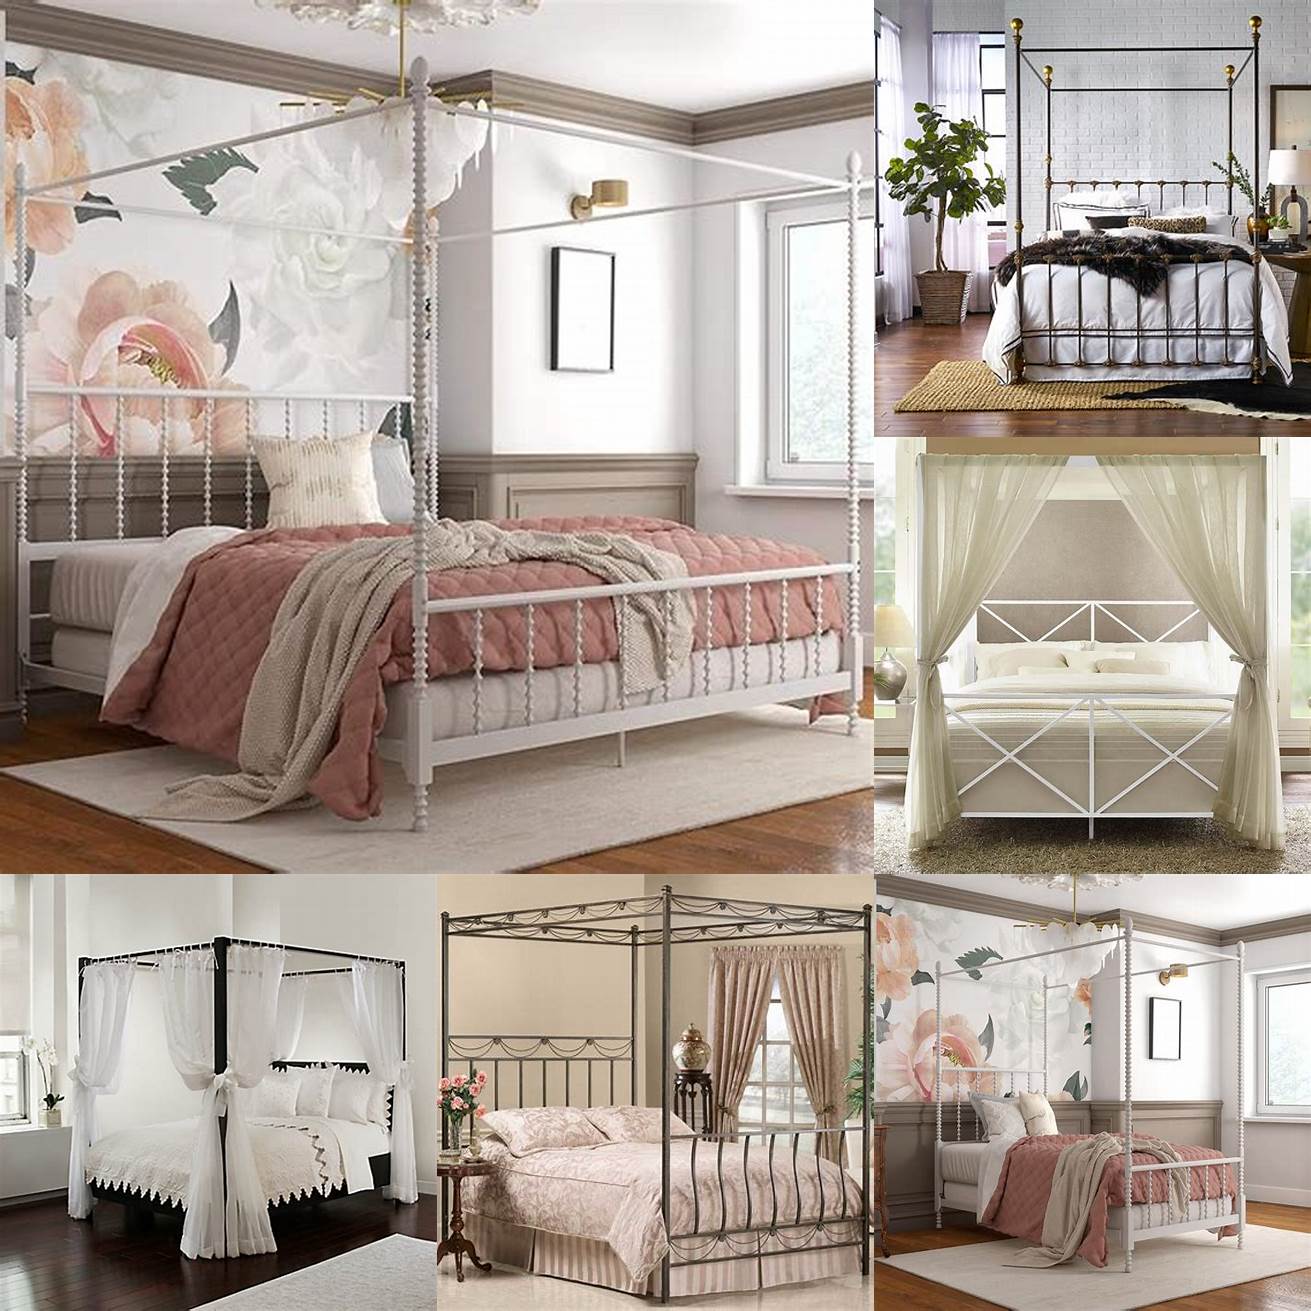 Traditional metal canopy bed with white bedding